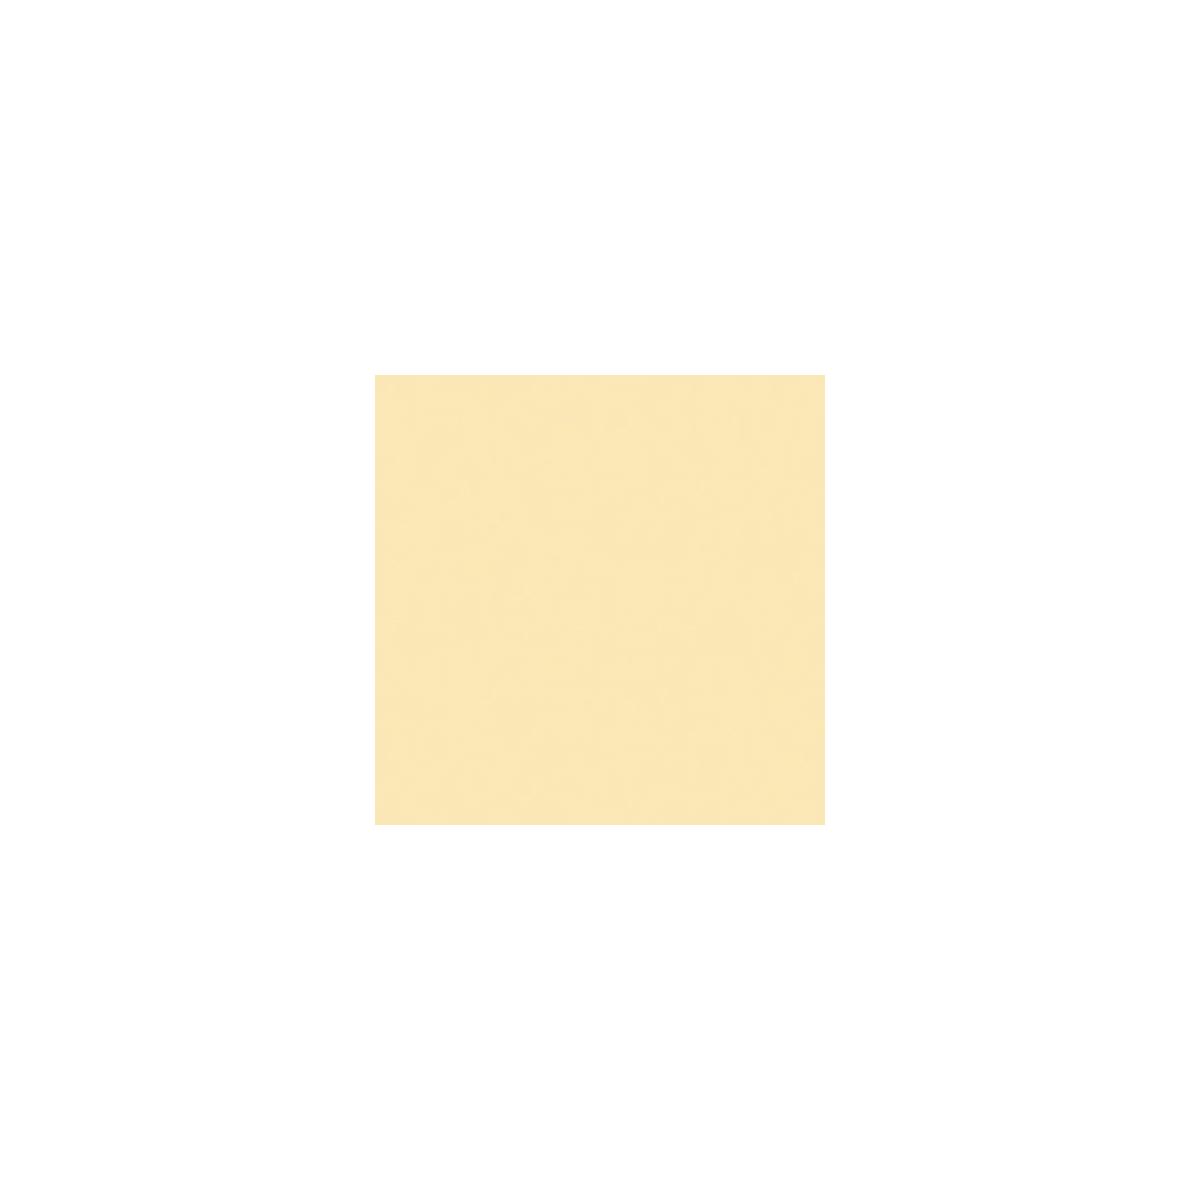 Image of Rosco 7 Roscolux Pale Yellow